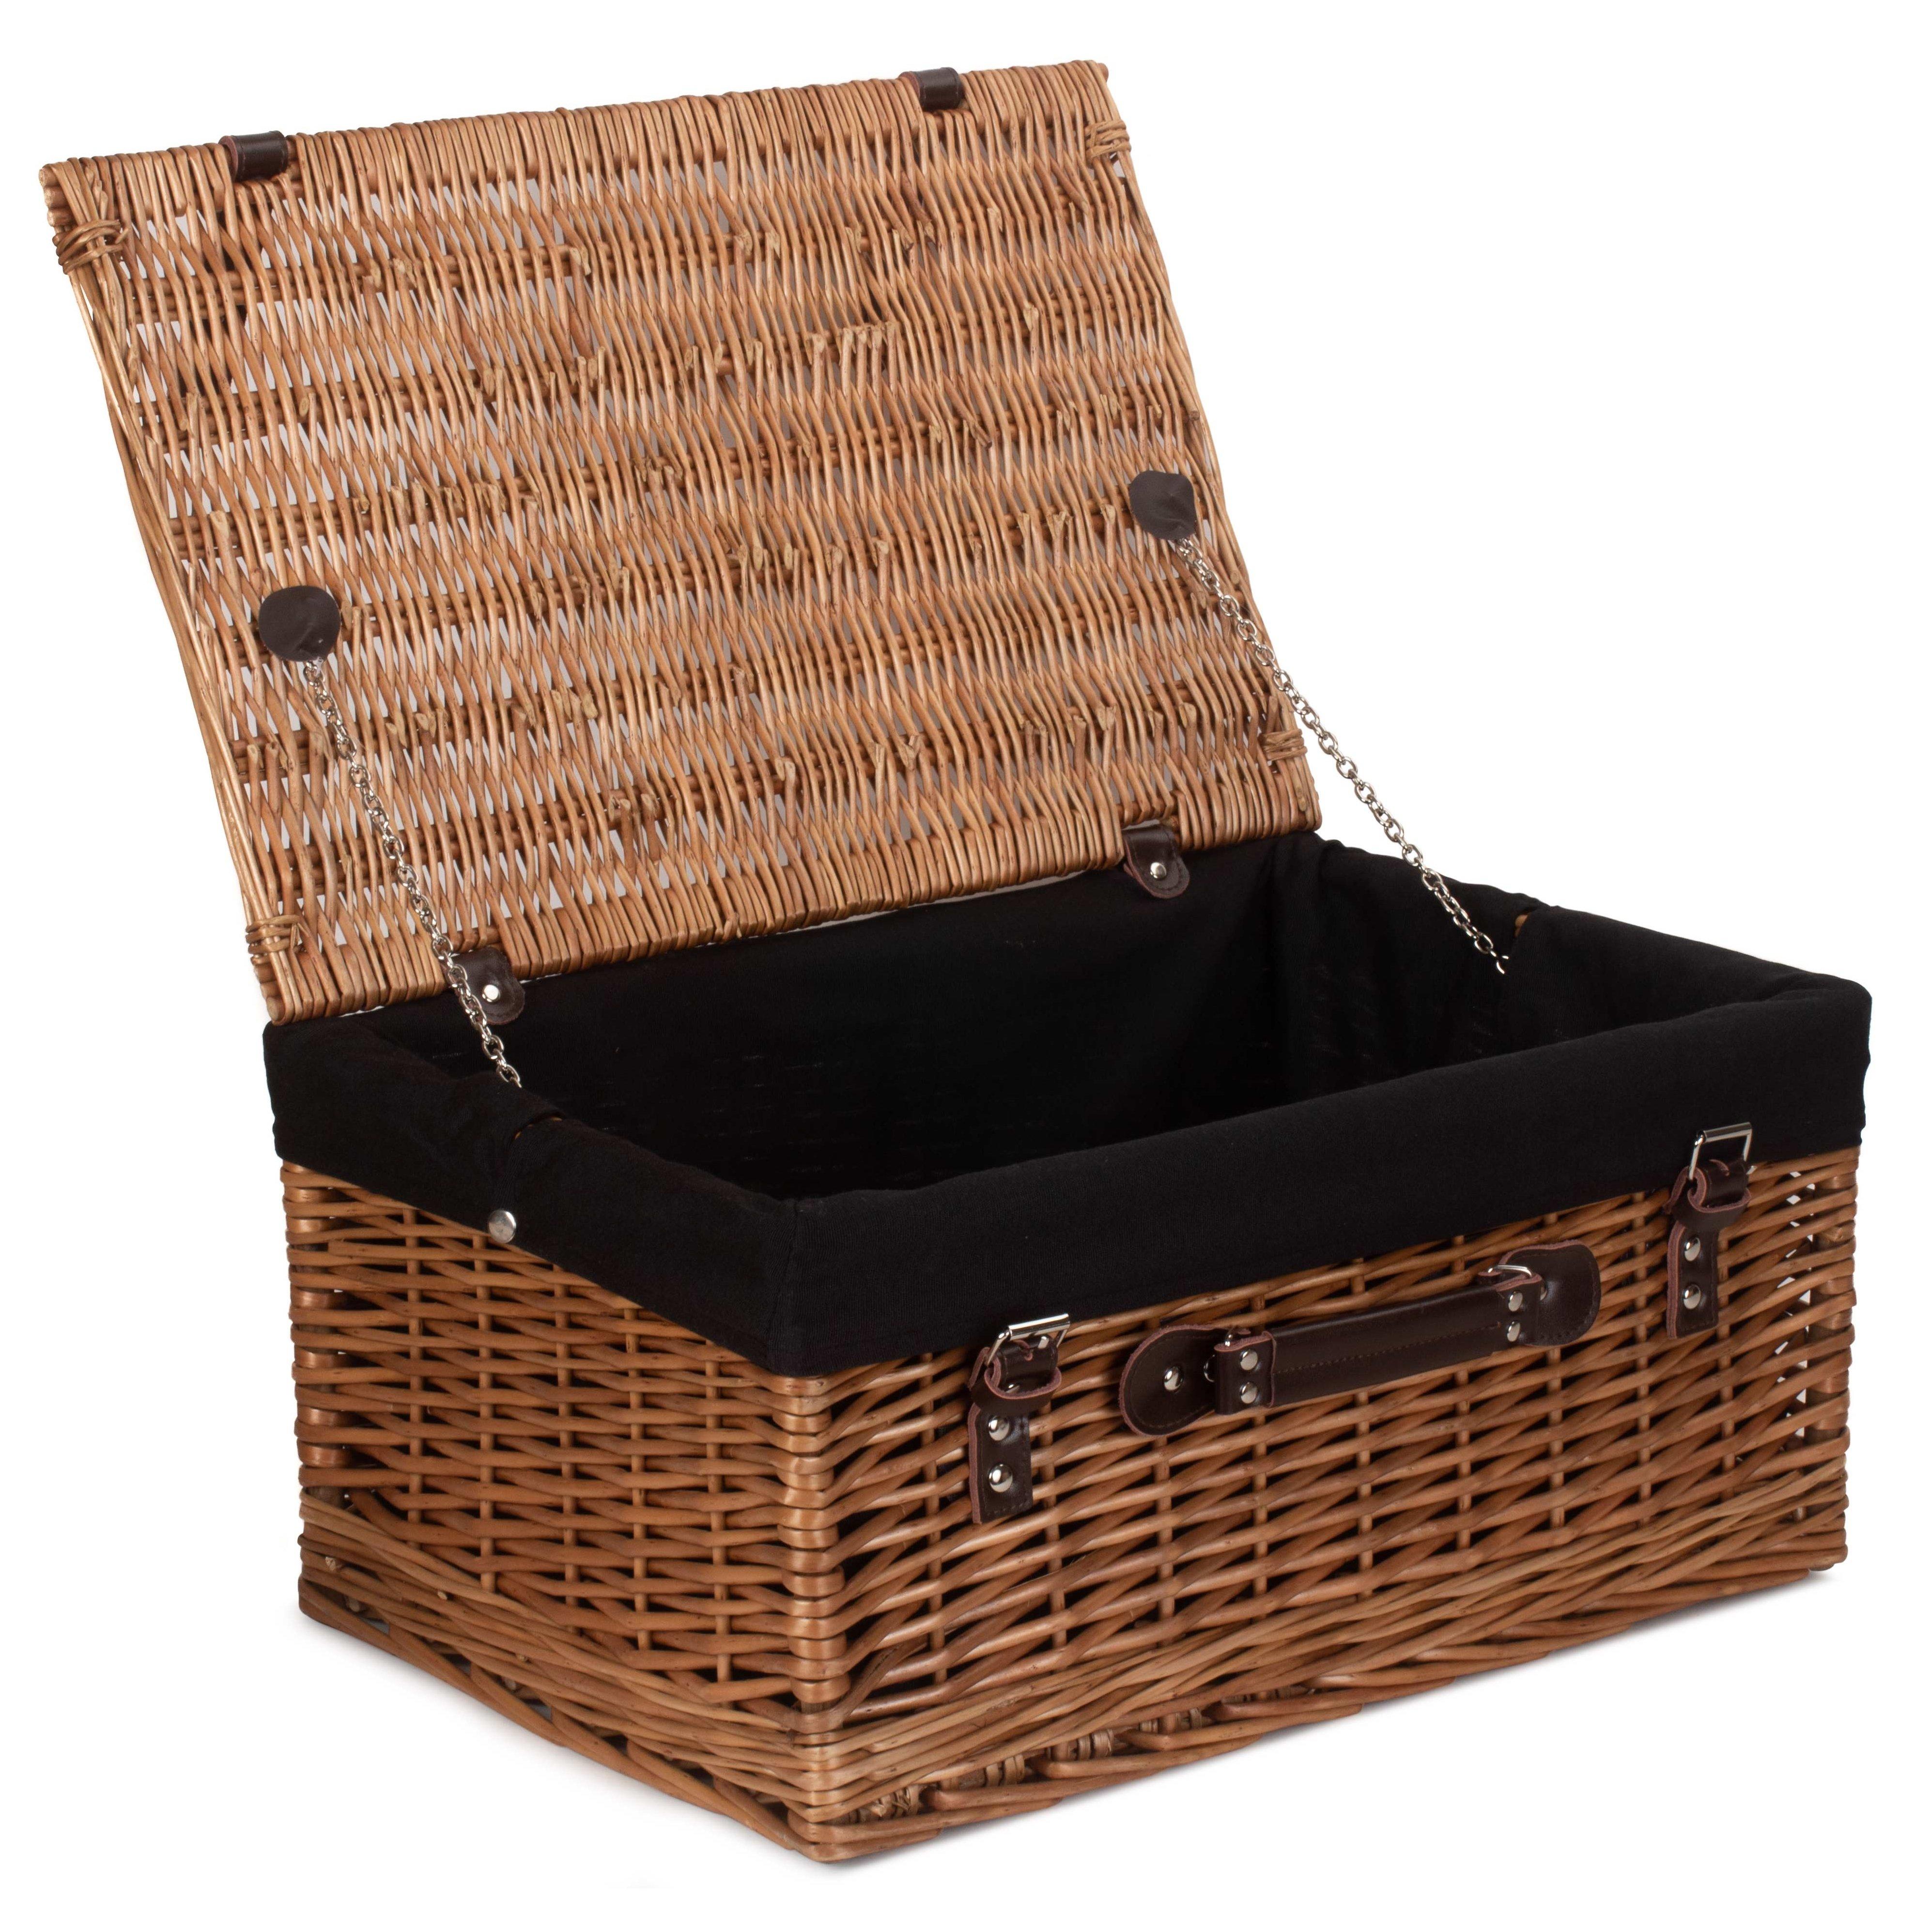 Wicker 51cm Double Steamed Picnic Basket with Cotton Lining